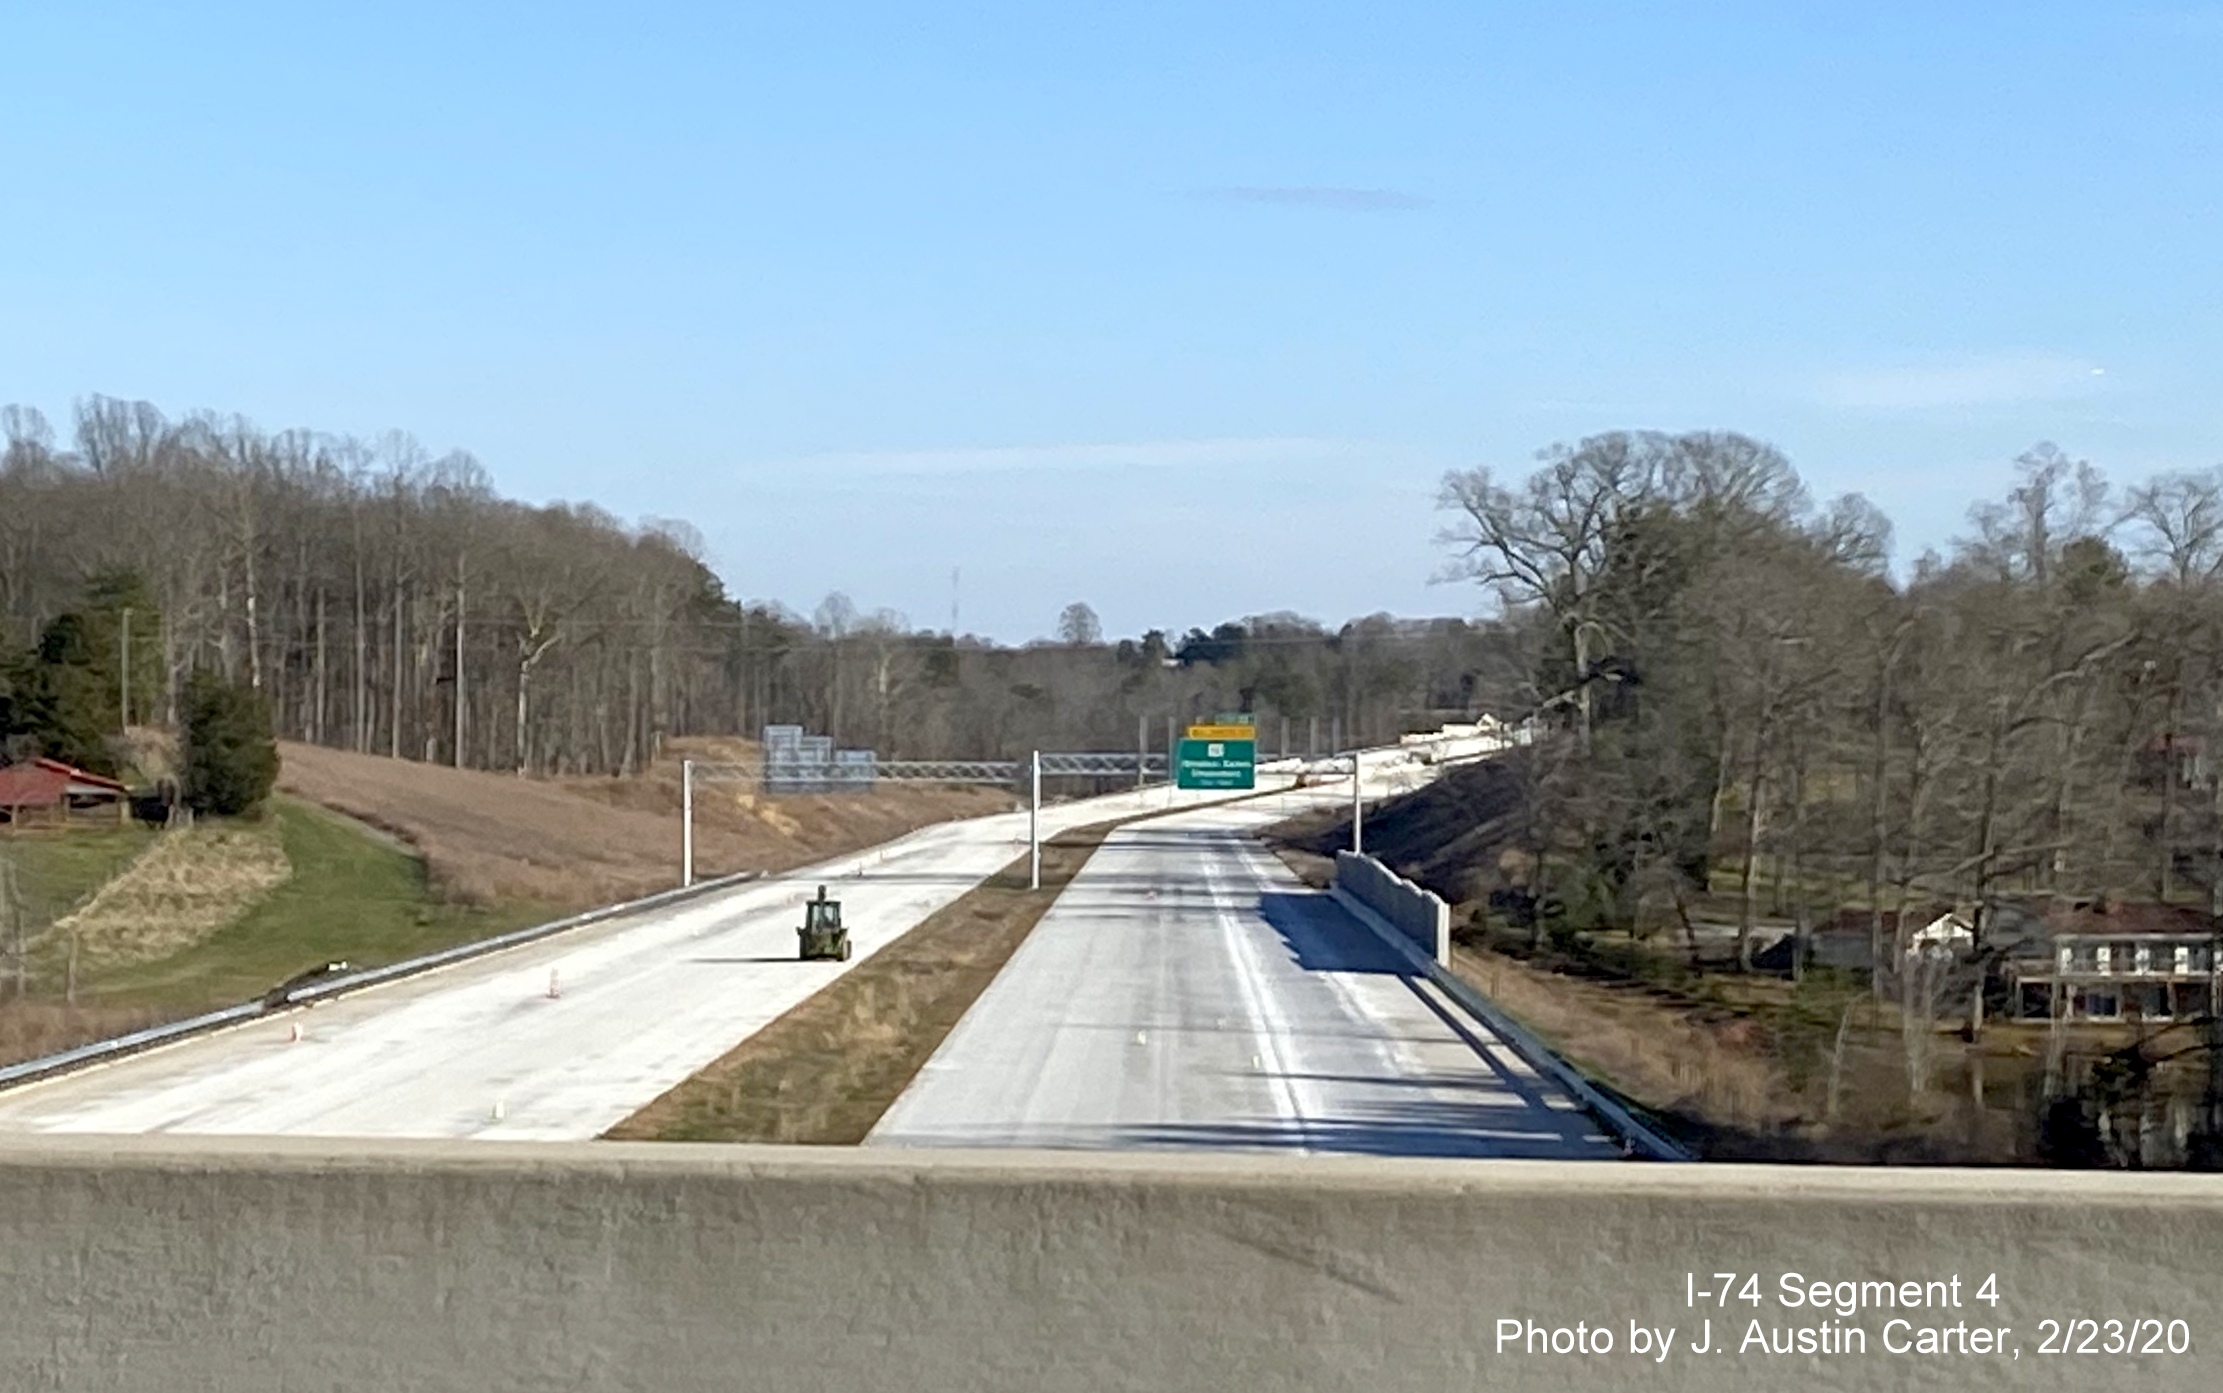 Image of new overhead signs being placed along future I-74/Winston-Salem Beltway for 
        US 421 and US 158 exits from Old Belews Creek Road bridge, by J. Austin Carter in Feb. 2020